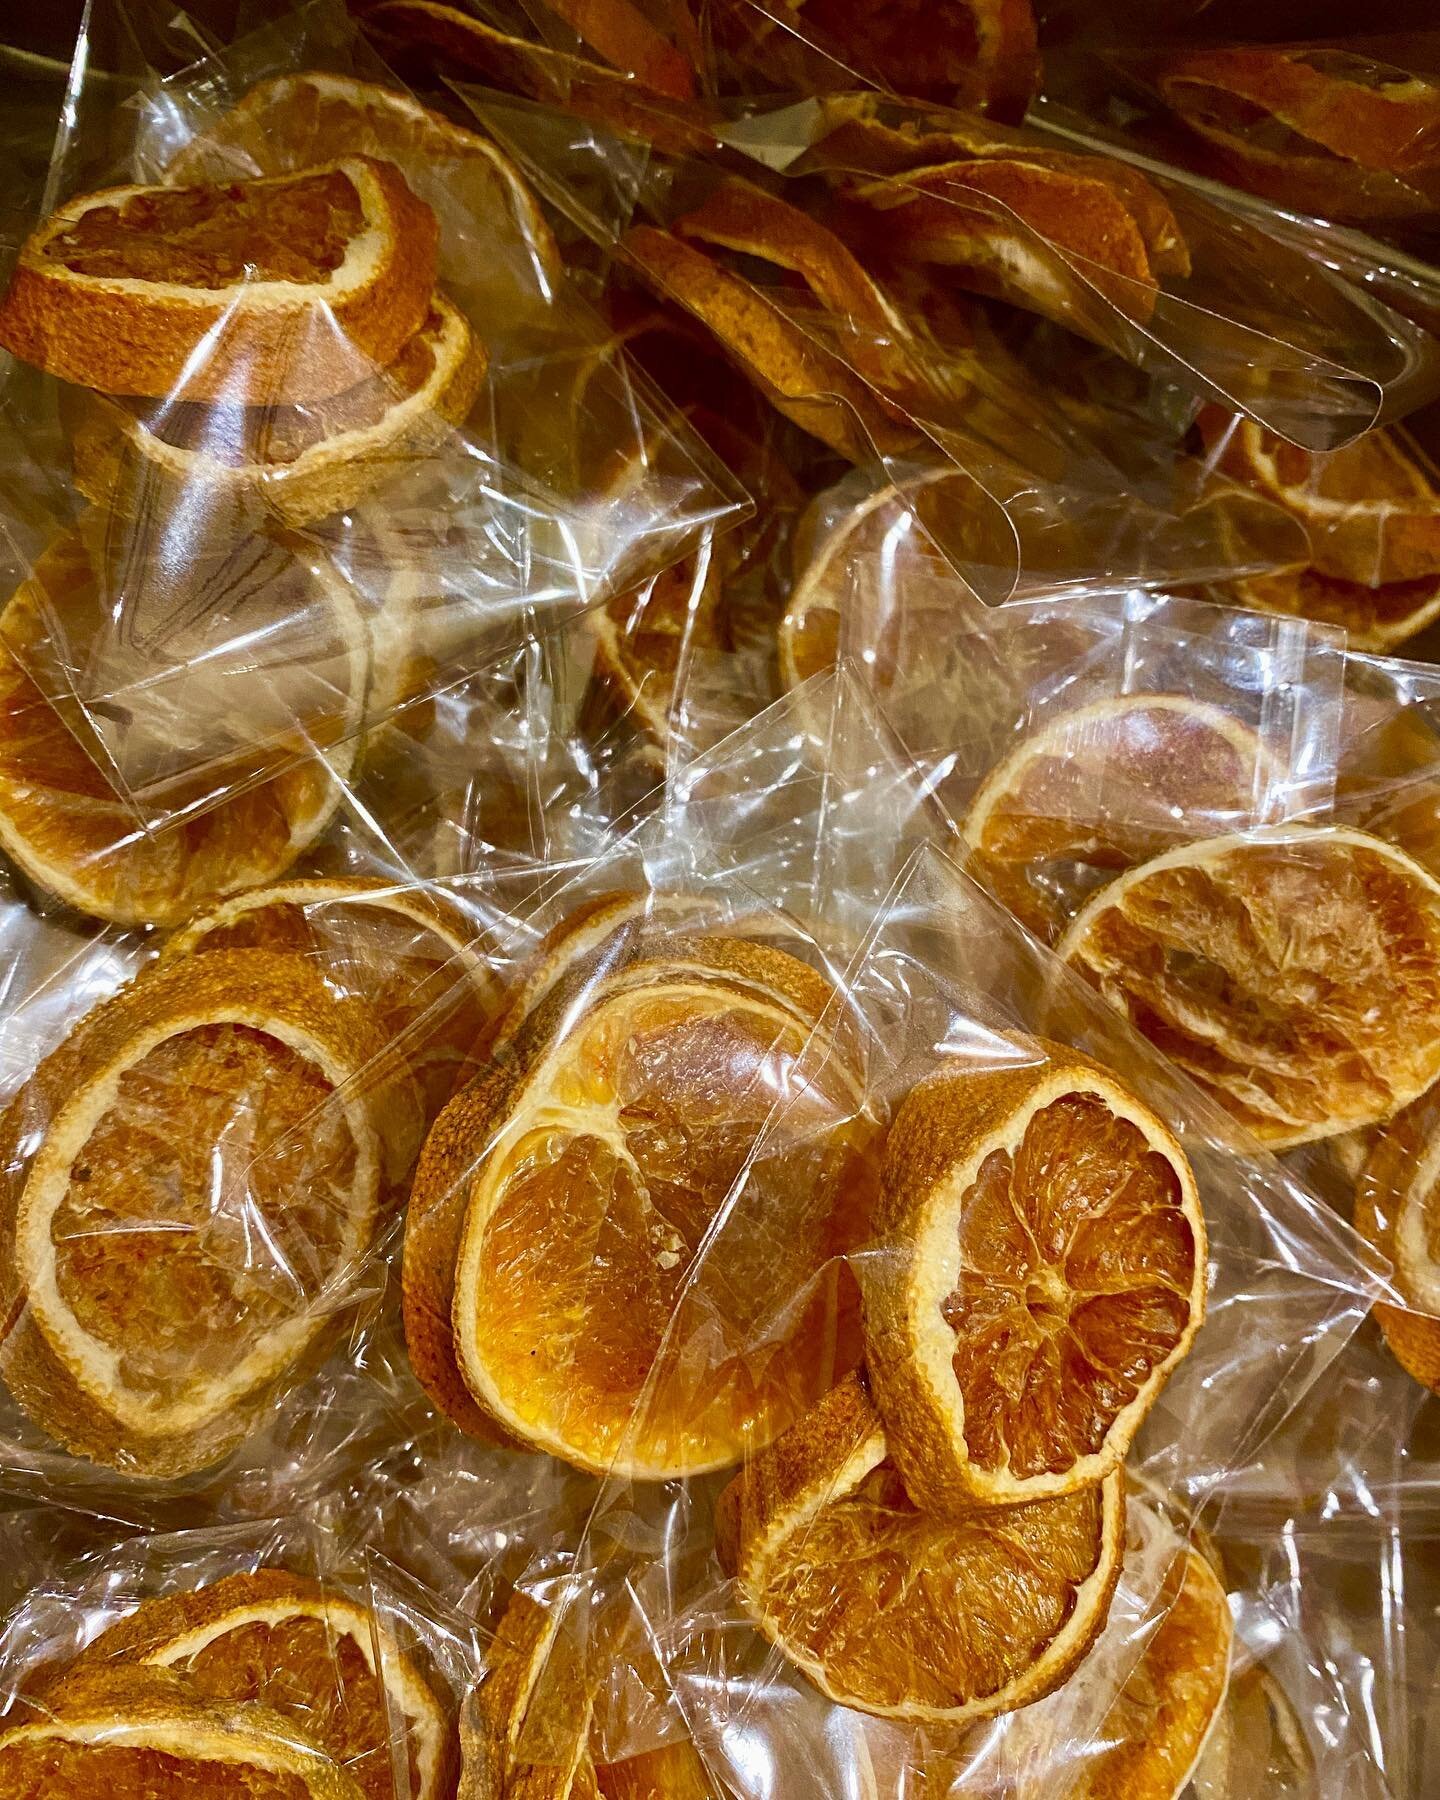 Yes, we do virtual cocktail kits, too! Dehydrated orange slices ready to go for our Negroni kits! 

.
.
.
.
.

#winesofinstagram #virtualtasting #samplebottles #winesamples #virtualwinetasting #wineonline #winetasting #wine #wines #cocktails #virtual